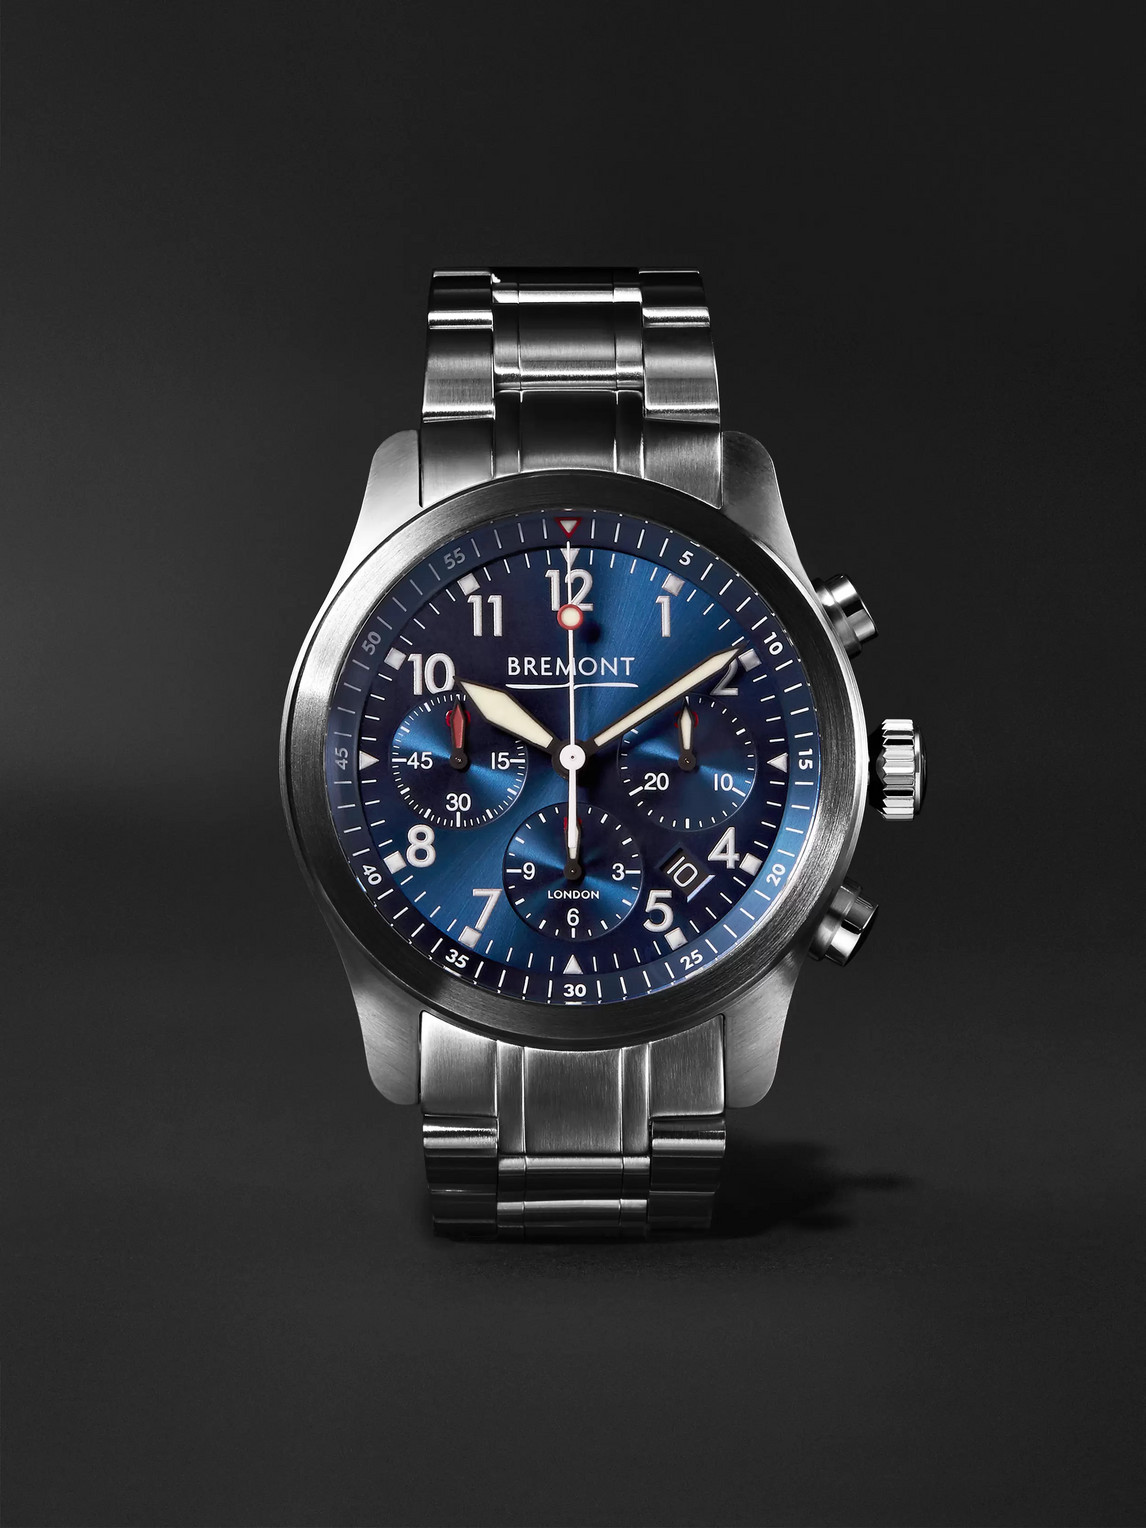 Bremont Alt1-p2 Automatic Chronograph 43mm Stainless Steel Watch, Ref. Alt1-p2-bl-b In Blue